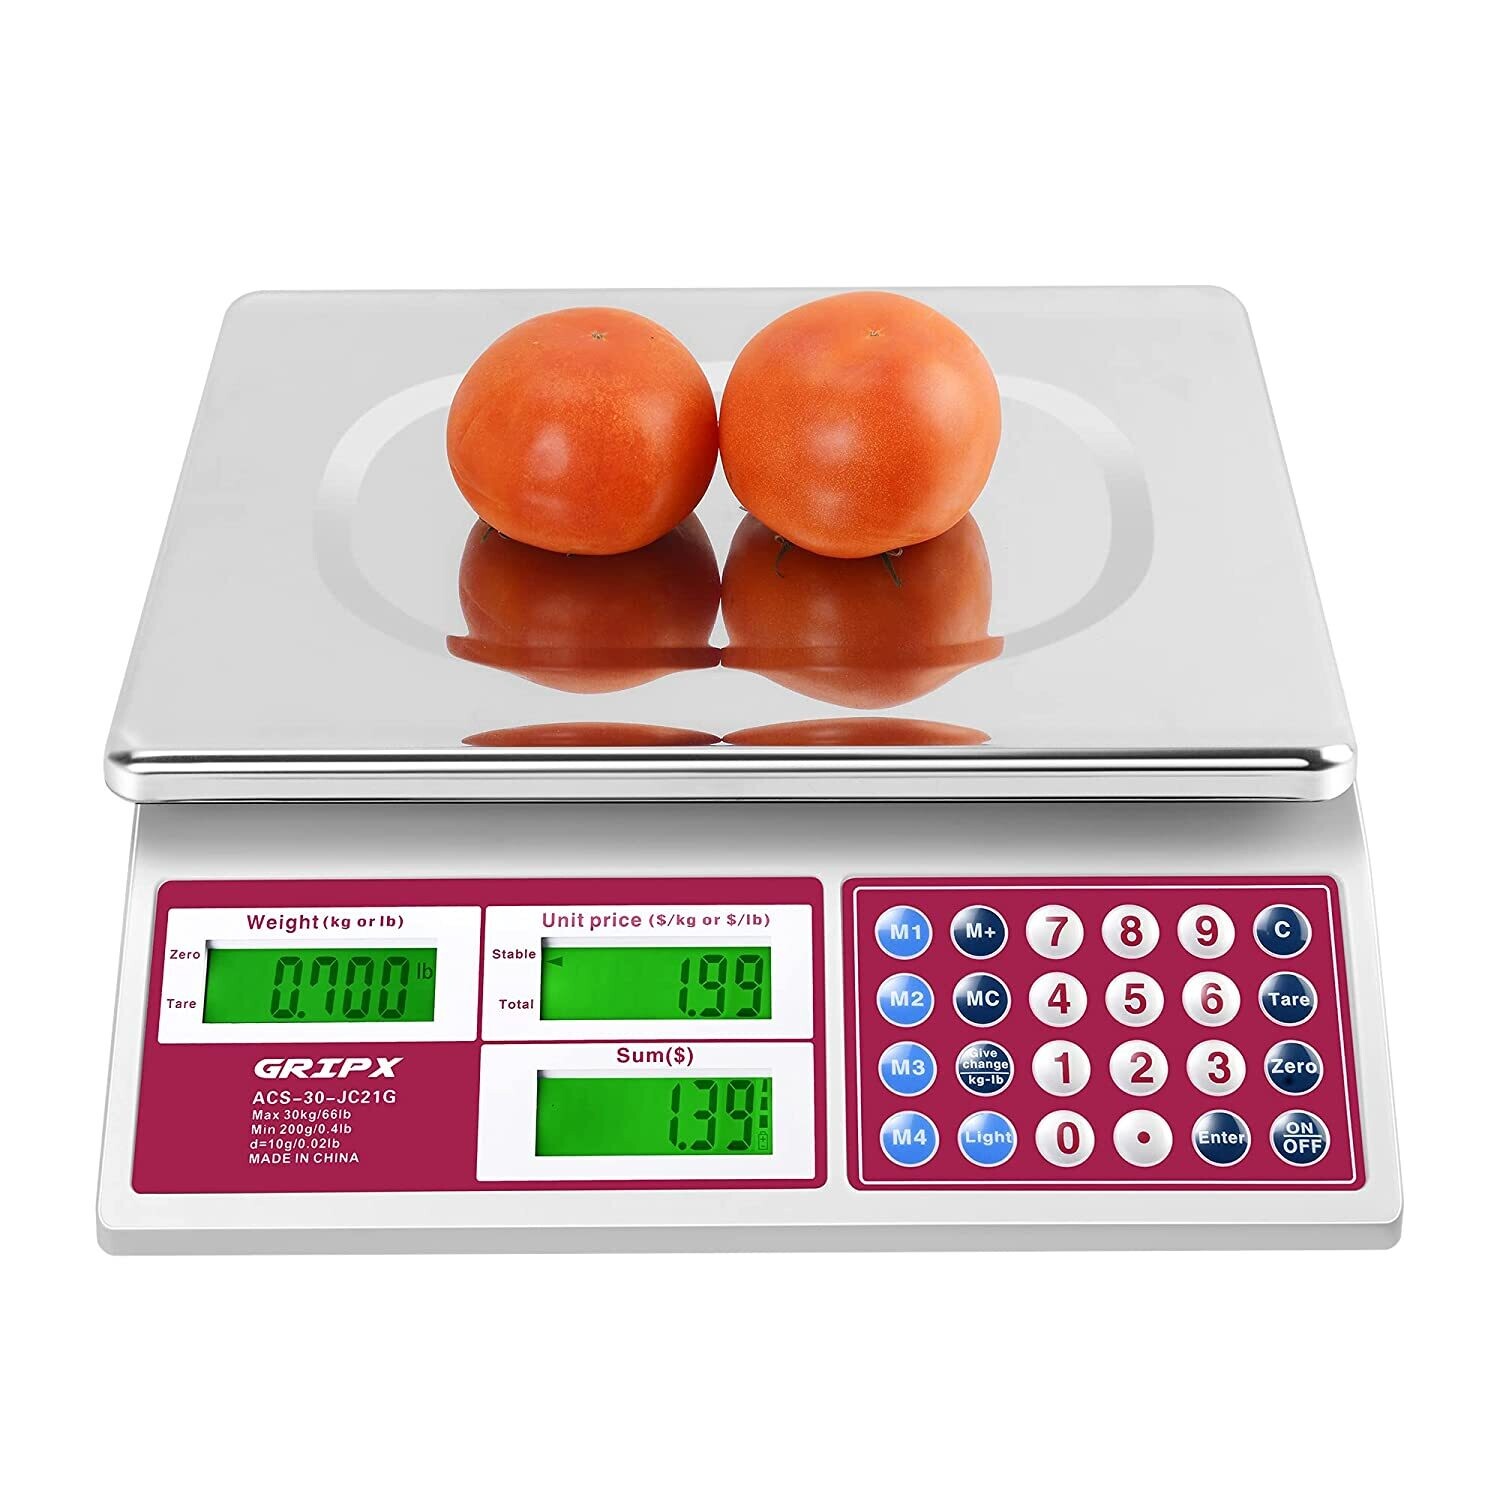 Digital Commercial Price Scale 30Kgs for Food Meat Fruit Produce with Green Backlight LCD Display